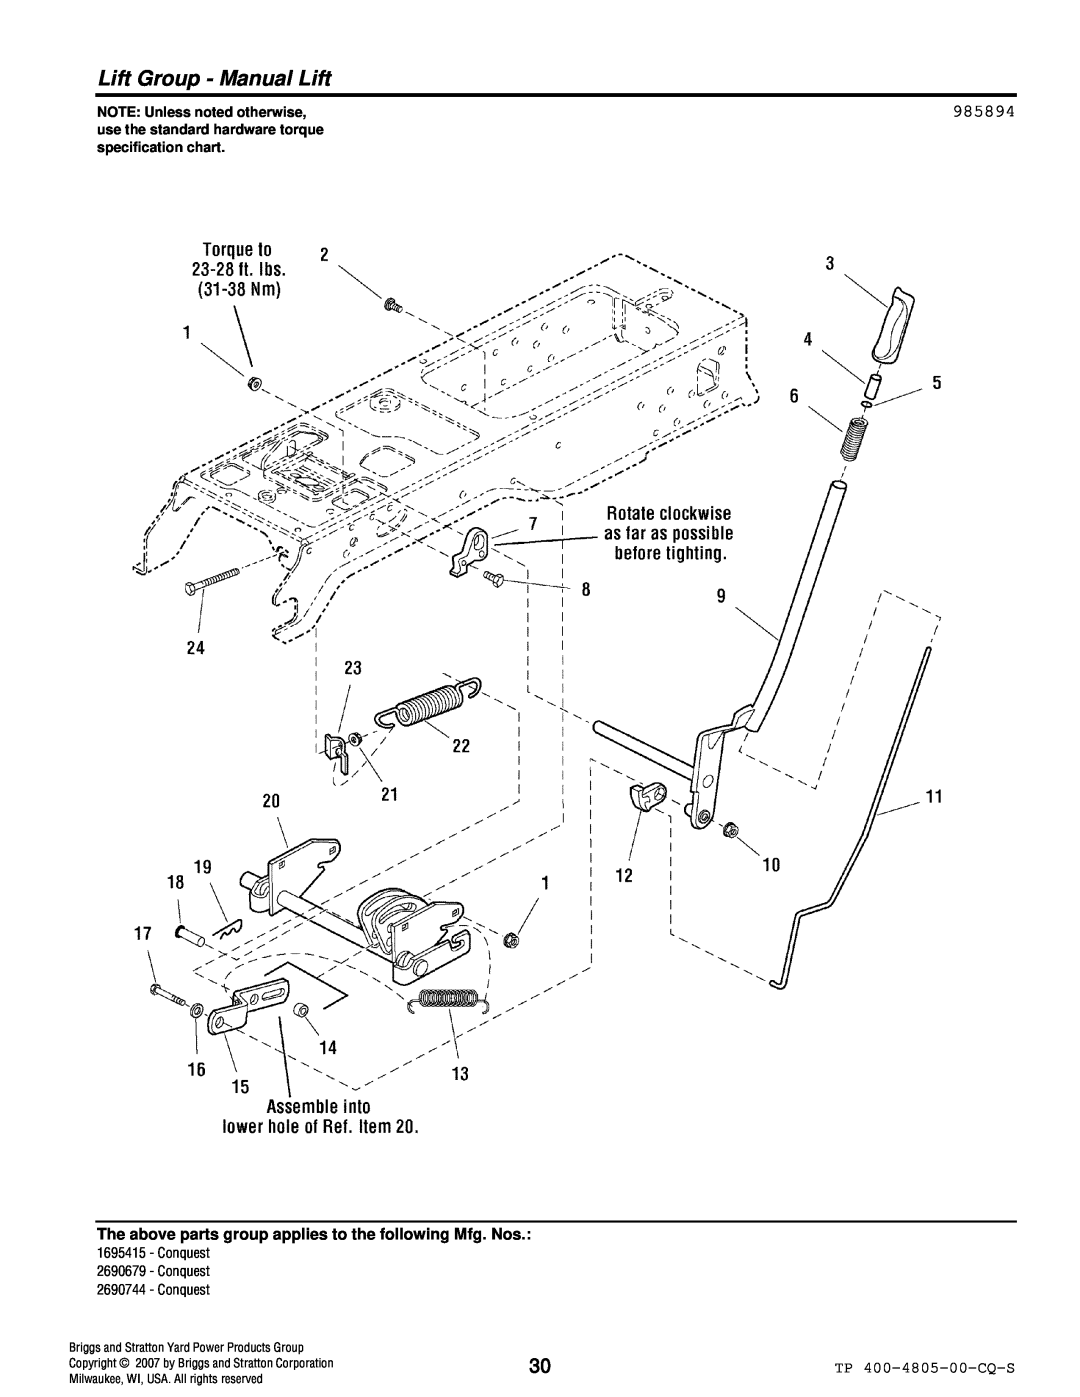 Simplicity 4WD Series manual Lift Group - Manual Lift, 985894, NOTE: Unless noted otherwise 